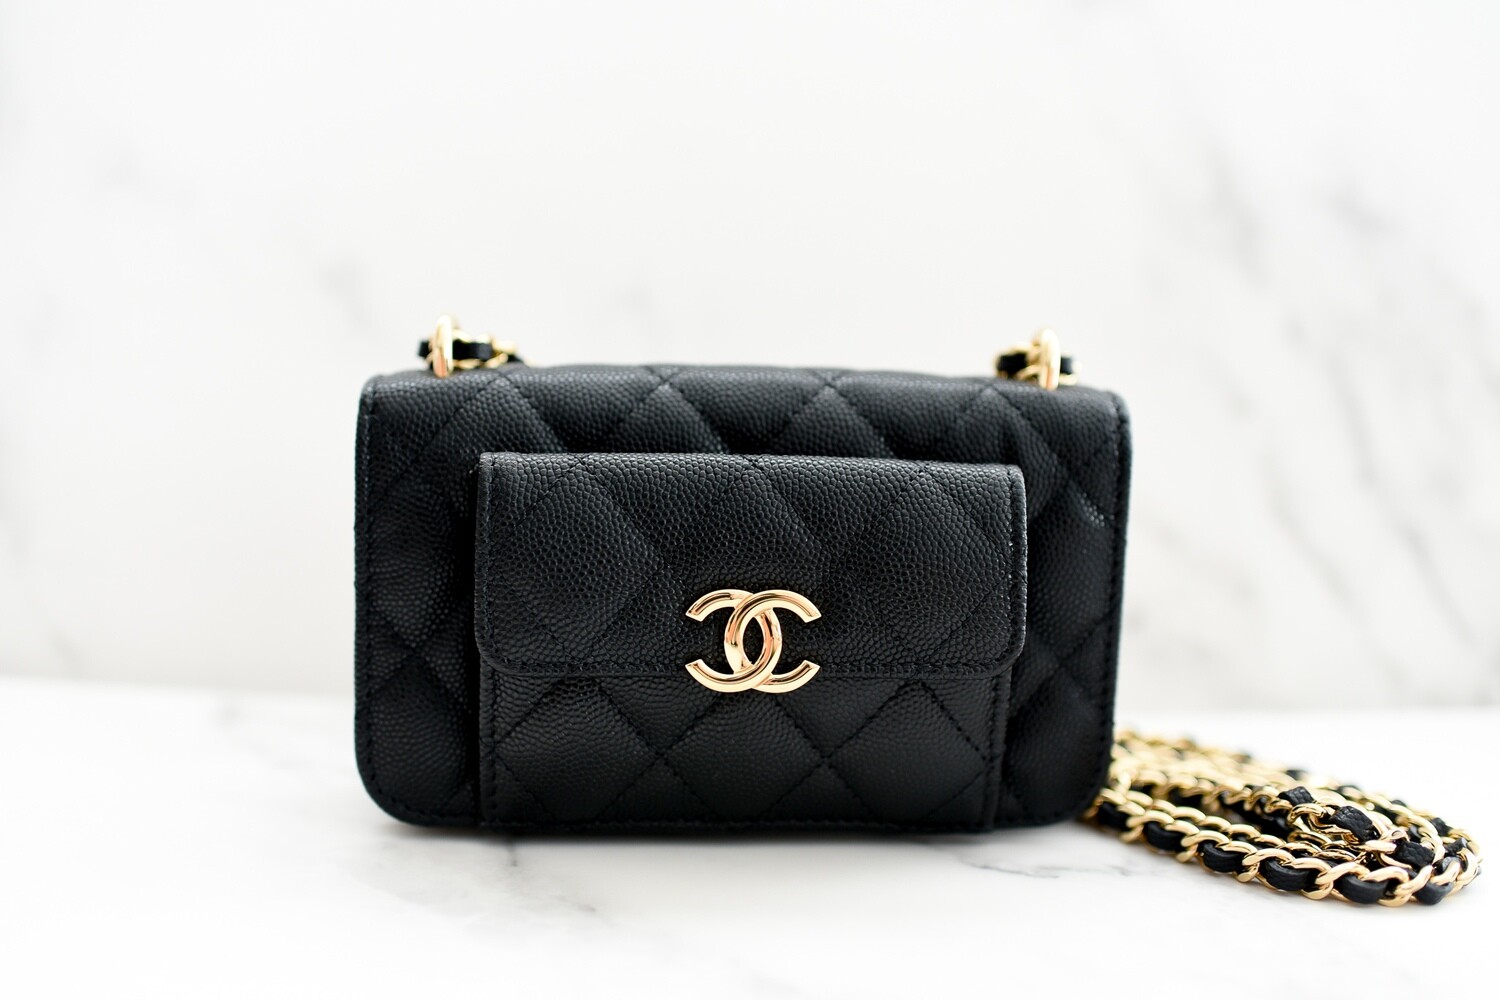 Chanel Clutch with Chain with Front Pocket, Black Caviar Leather with Gold  hardware, New in Box GA001